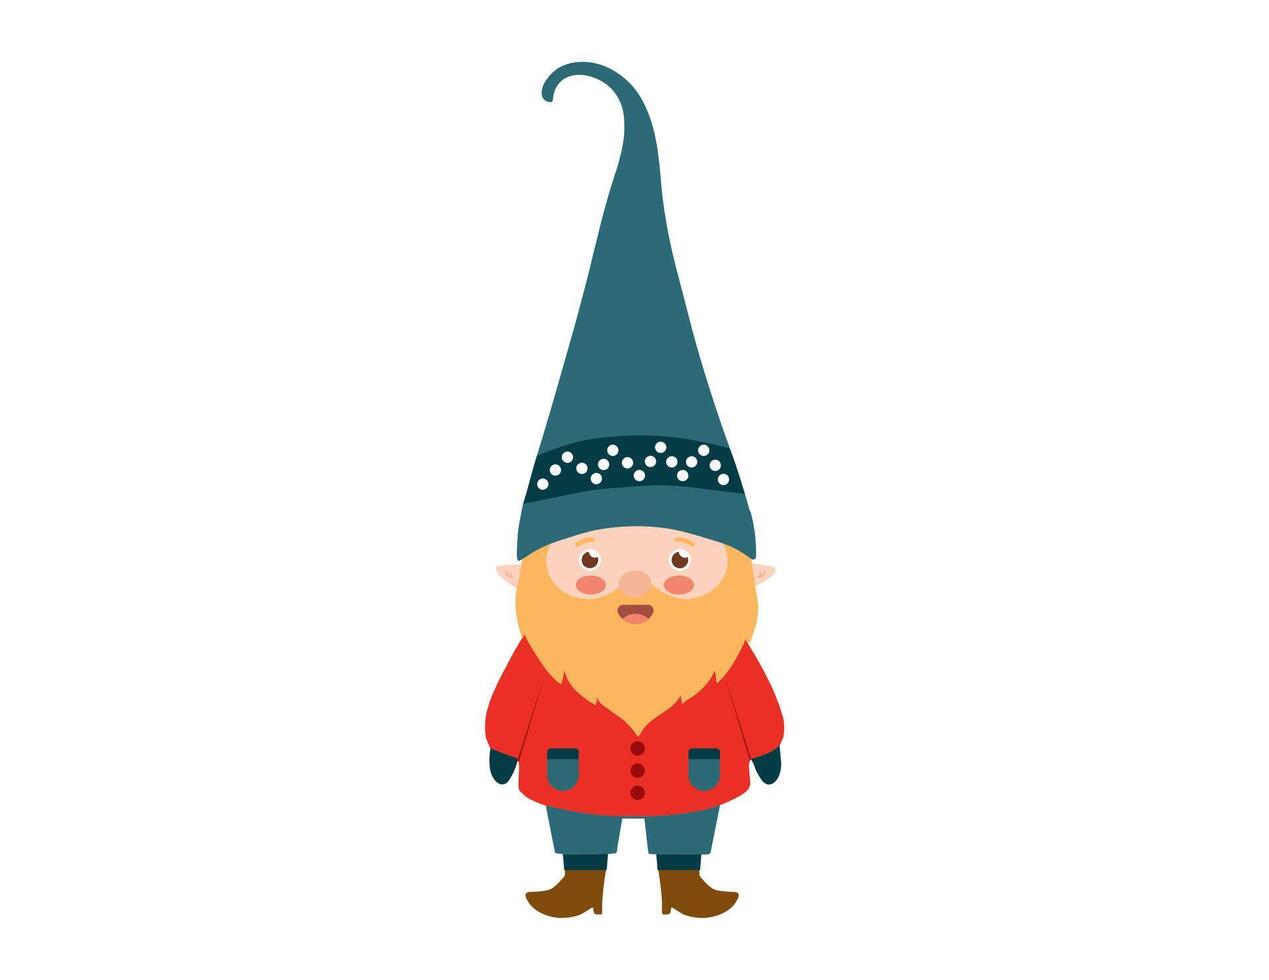 Cute gnome with big hat illustration. Gnome or elf clipart for kids in Scandinavian and flat style vector